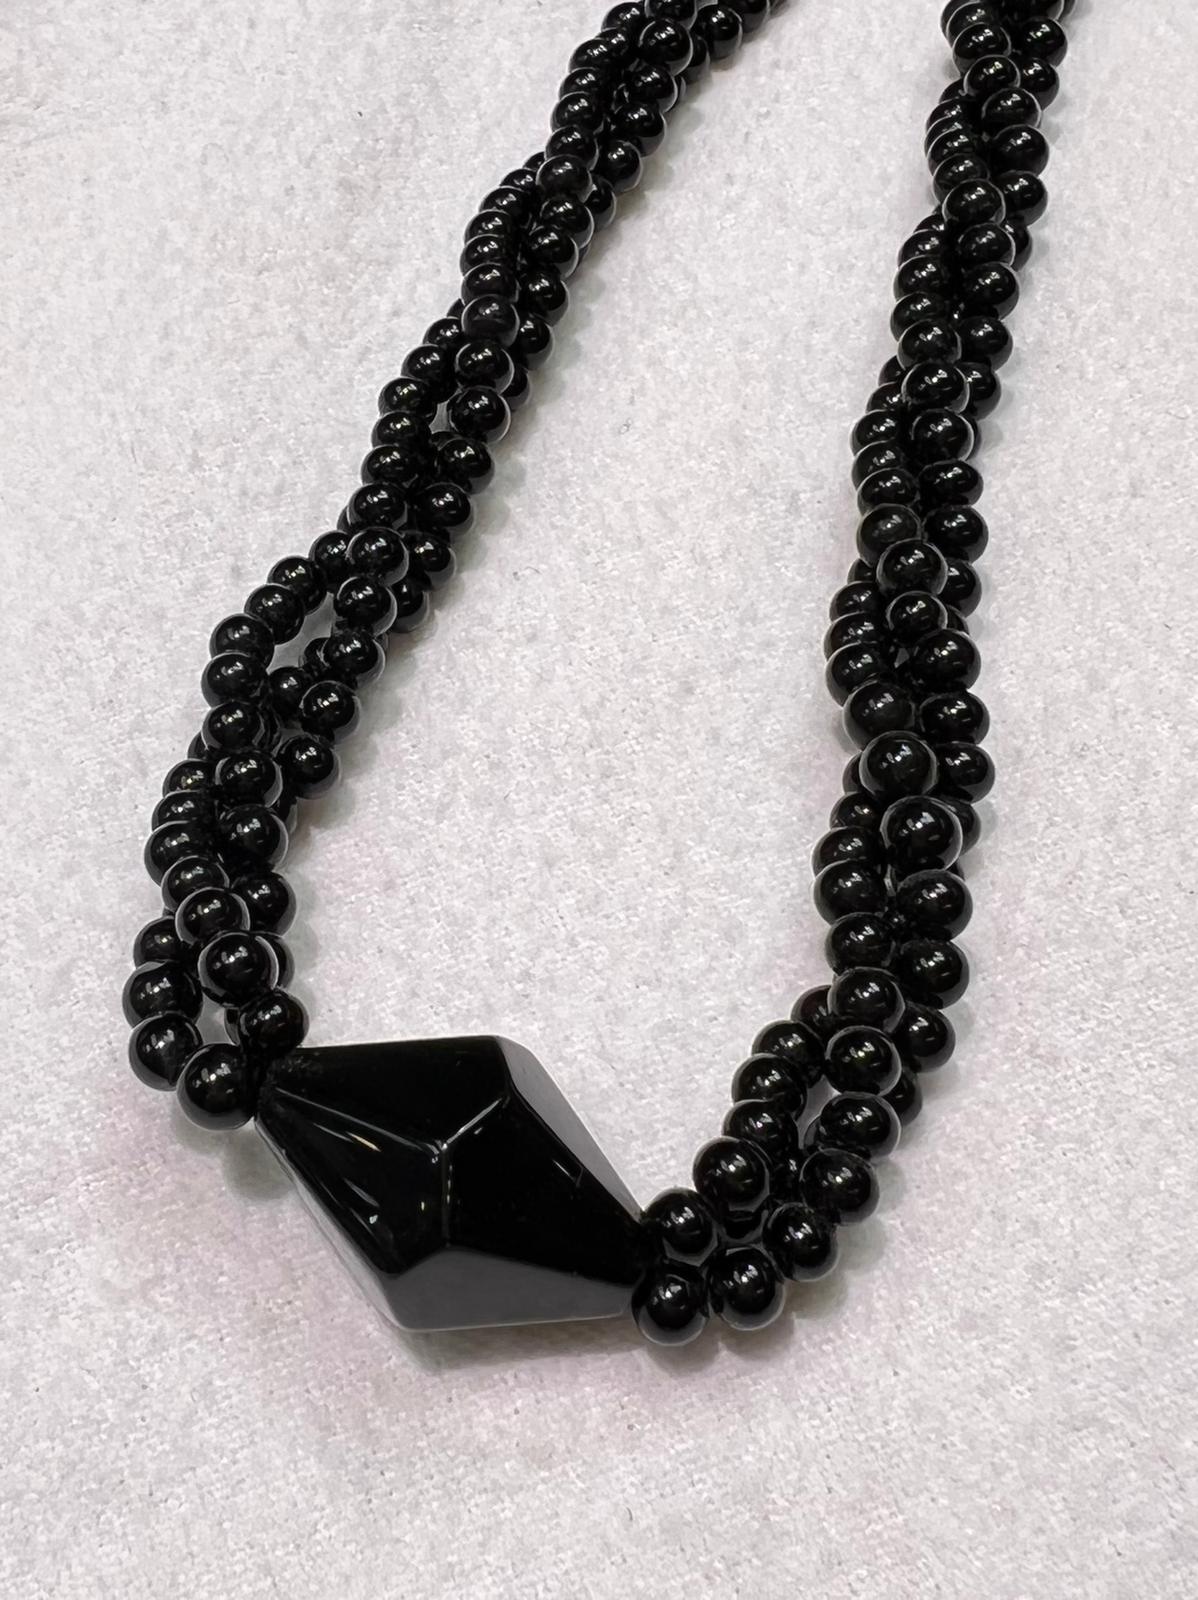 4mm Black onyx with 14k goldfish hook with 1 piece onyx centerpiece 14X20 15 inches

The calming effect of black onyx makes it useful for coping with difficult emotions like loss and worry. Yin and yang are further balanced by black onyx. It aids